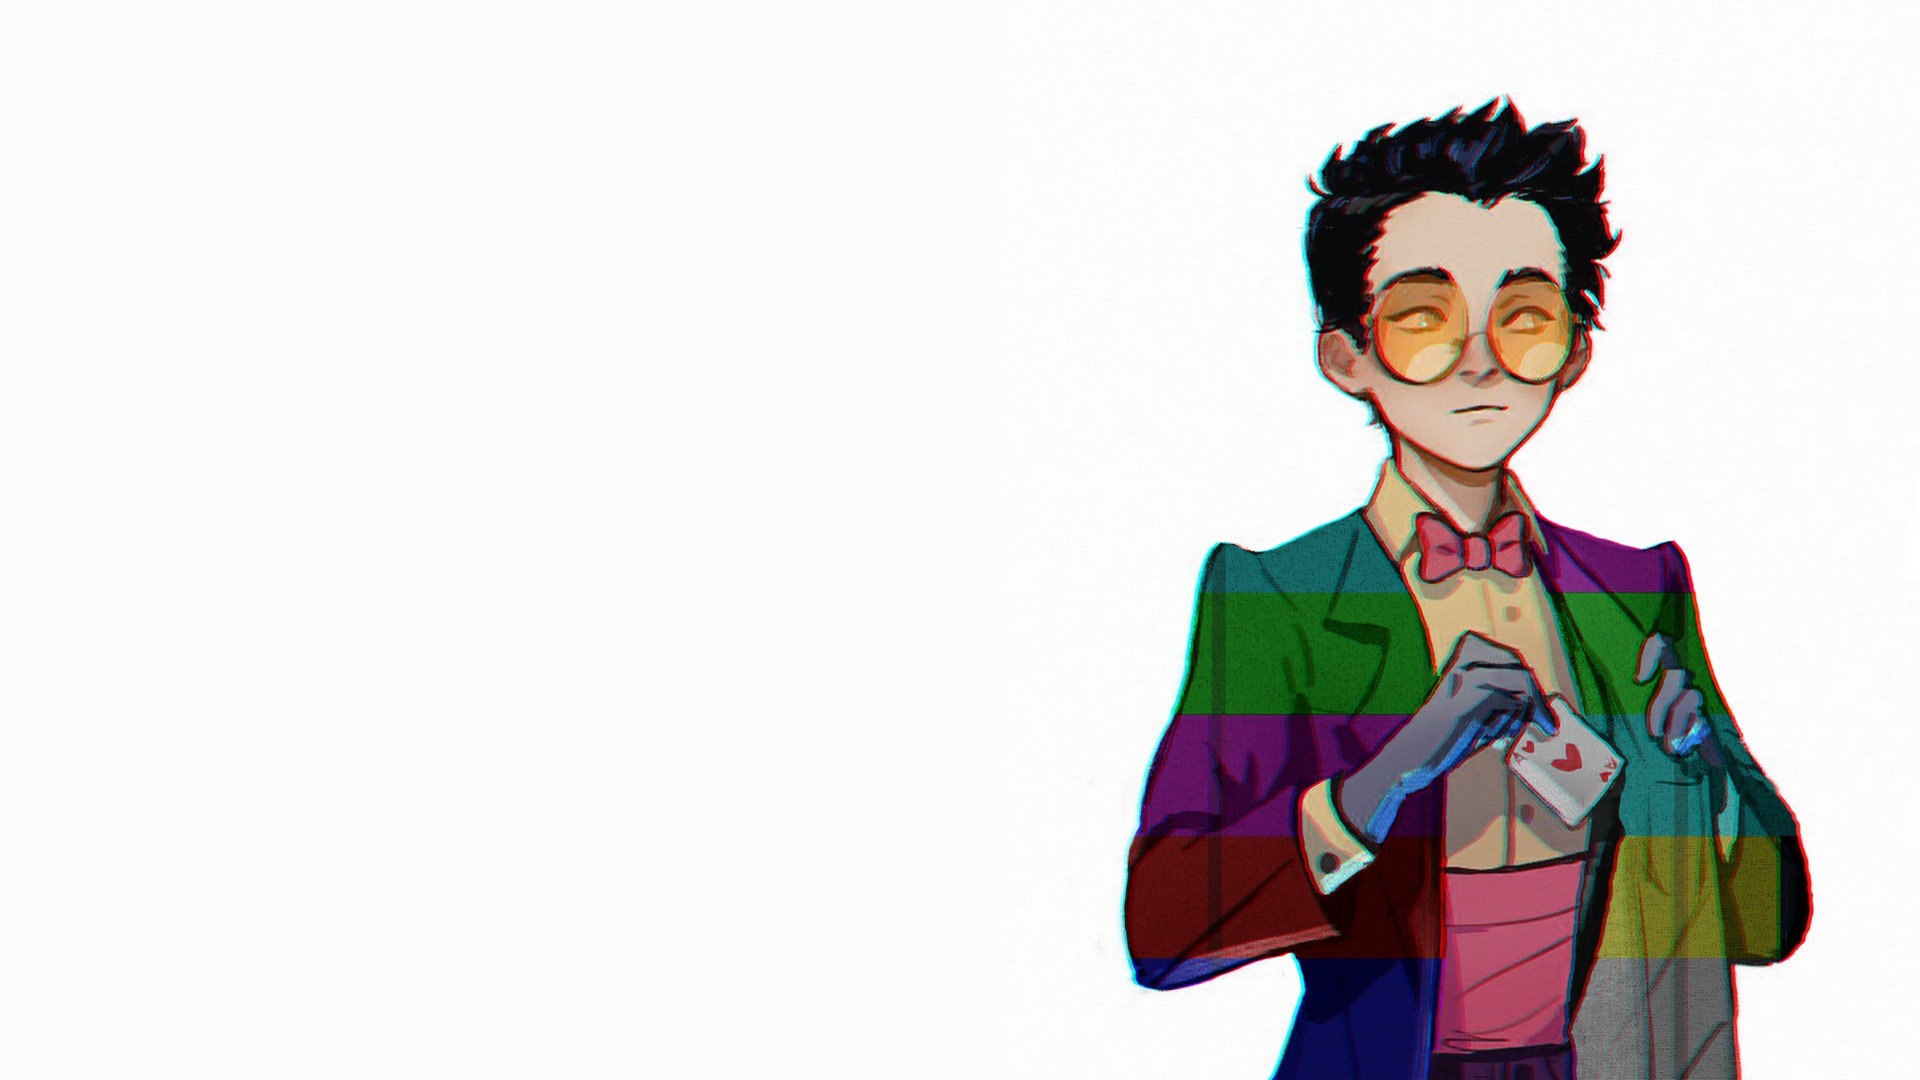 The Warden, Superjail, Top knot, Cards, Simple background, Chromatic aberration Wallpaper